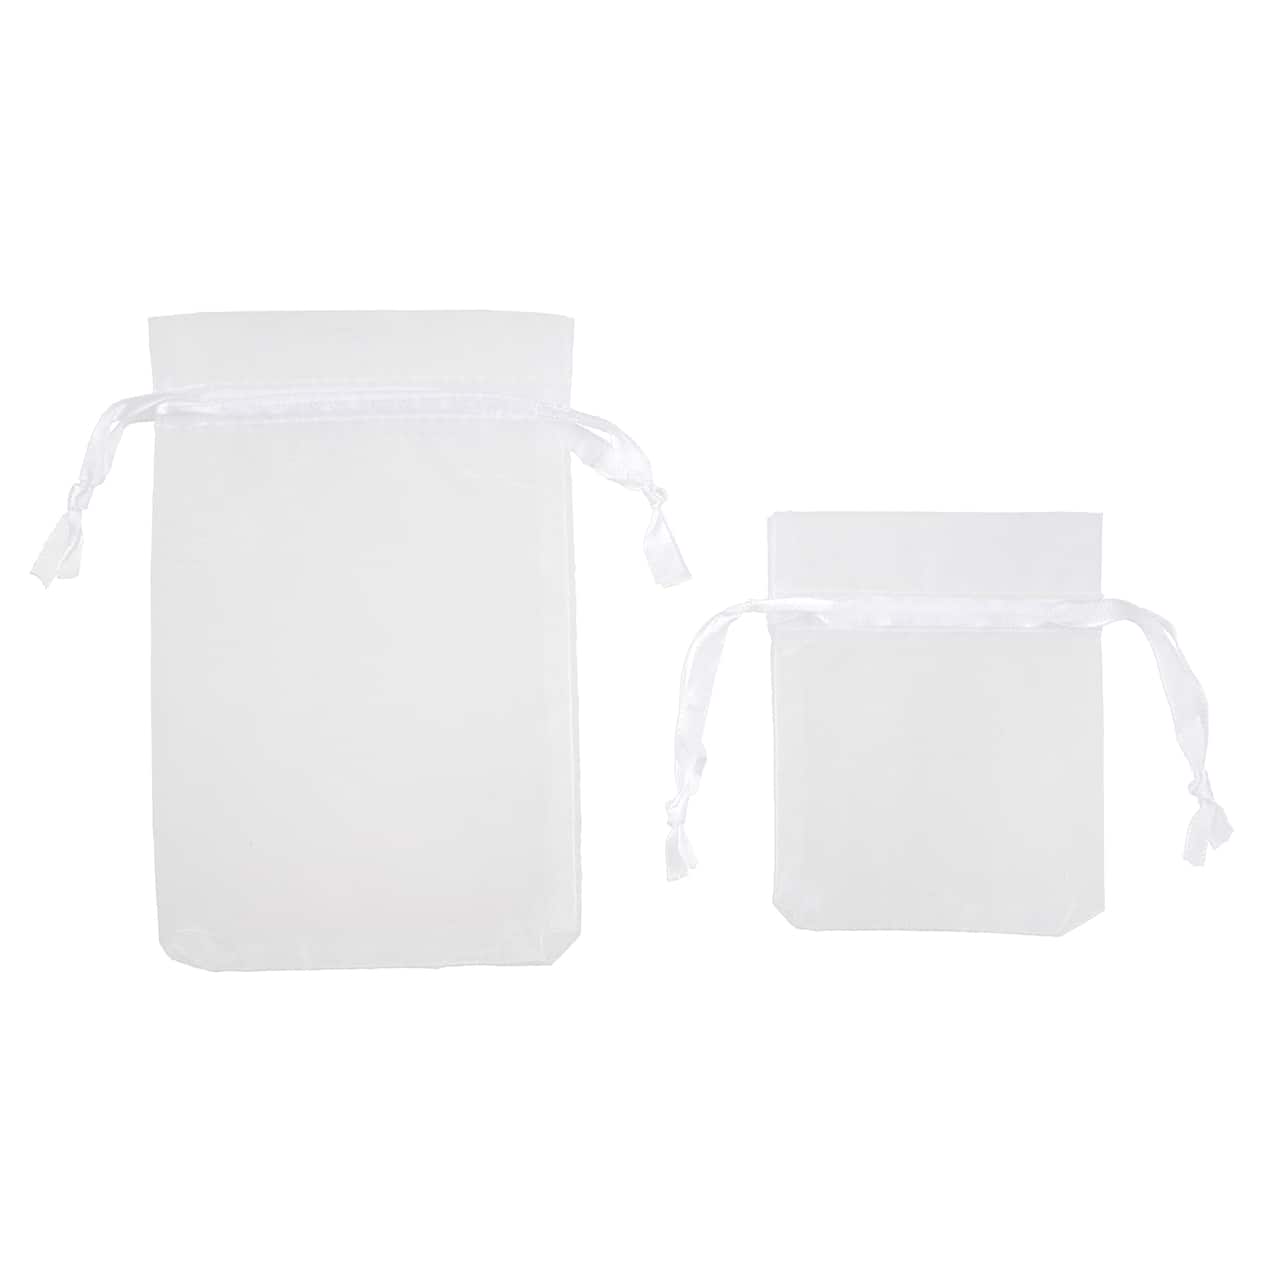 Jewelry Packaging Organza Bags by Bead Landing&#x2122;, 12ct.